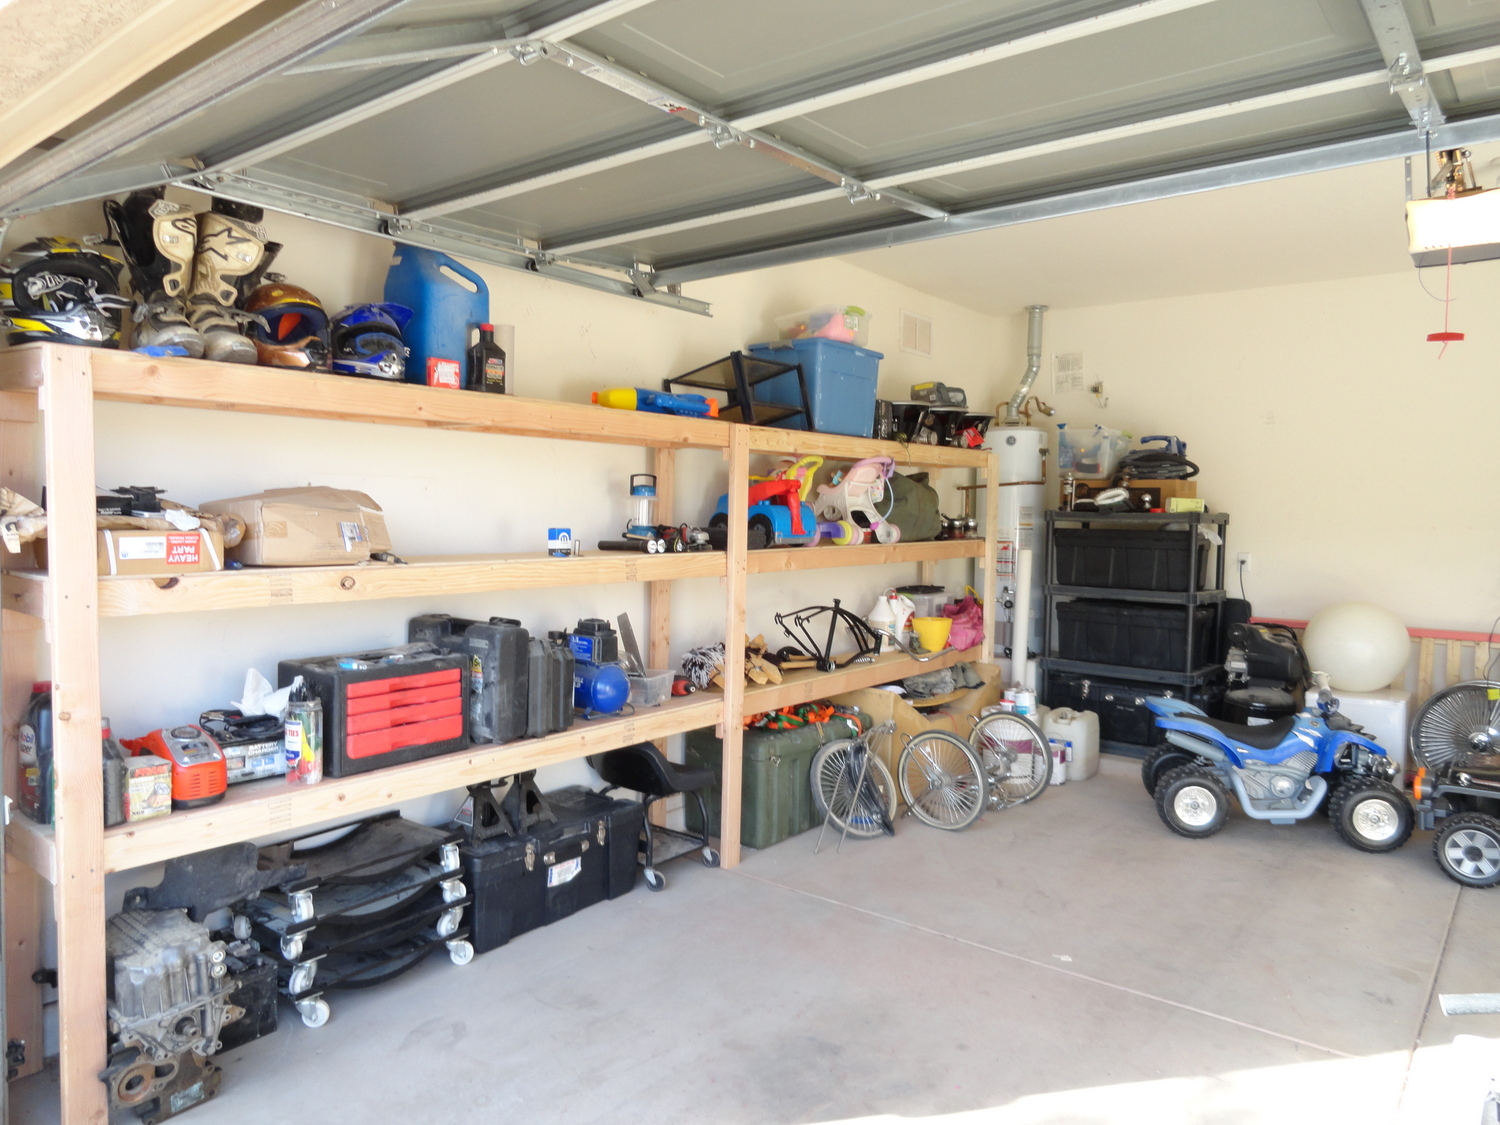 Almost wall to wall garage storage